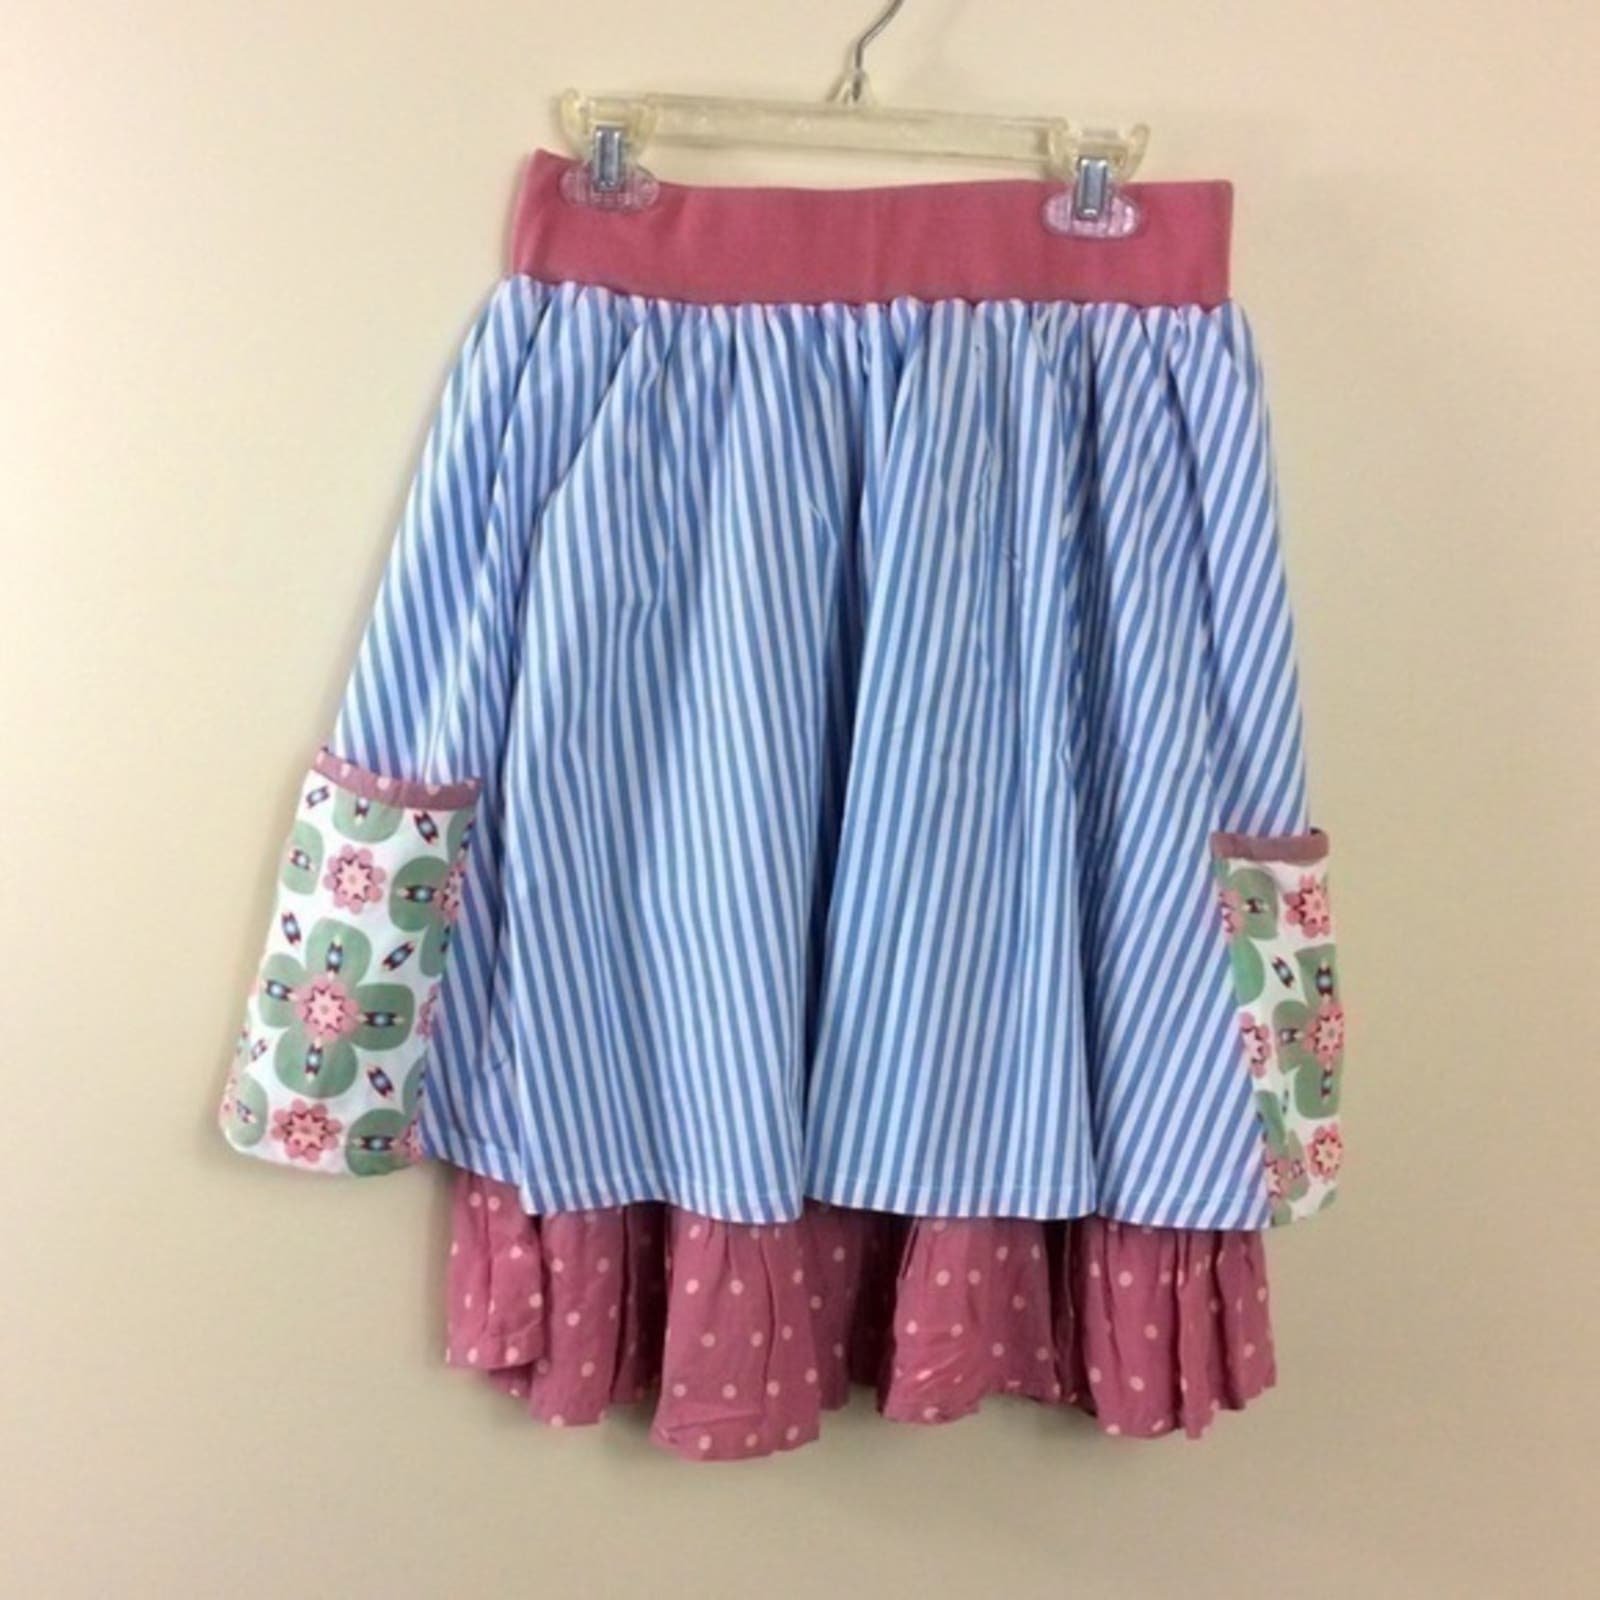 ! NWOT Matilda Jane happy & free floating by skirt. Small. Stretch cotton j9bd3C89r